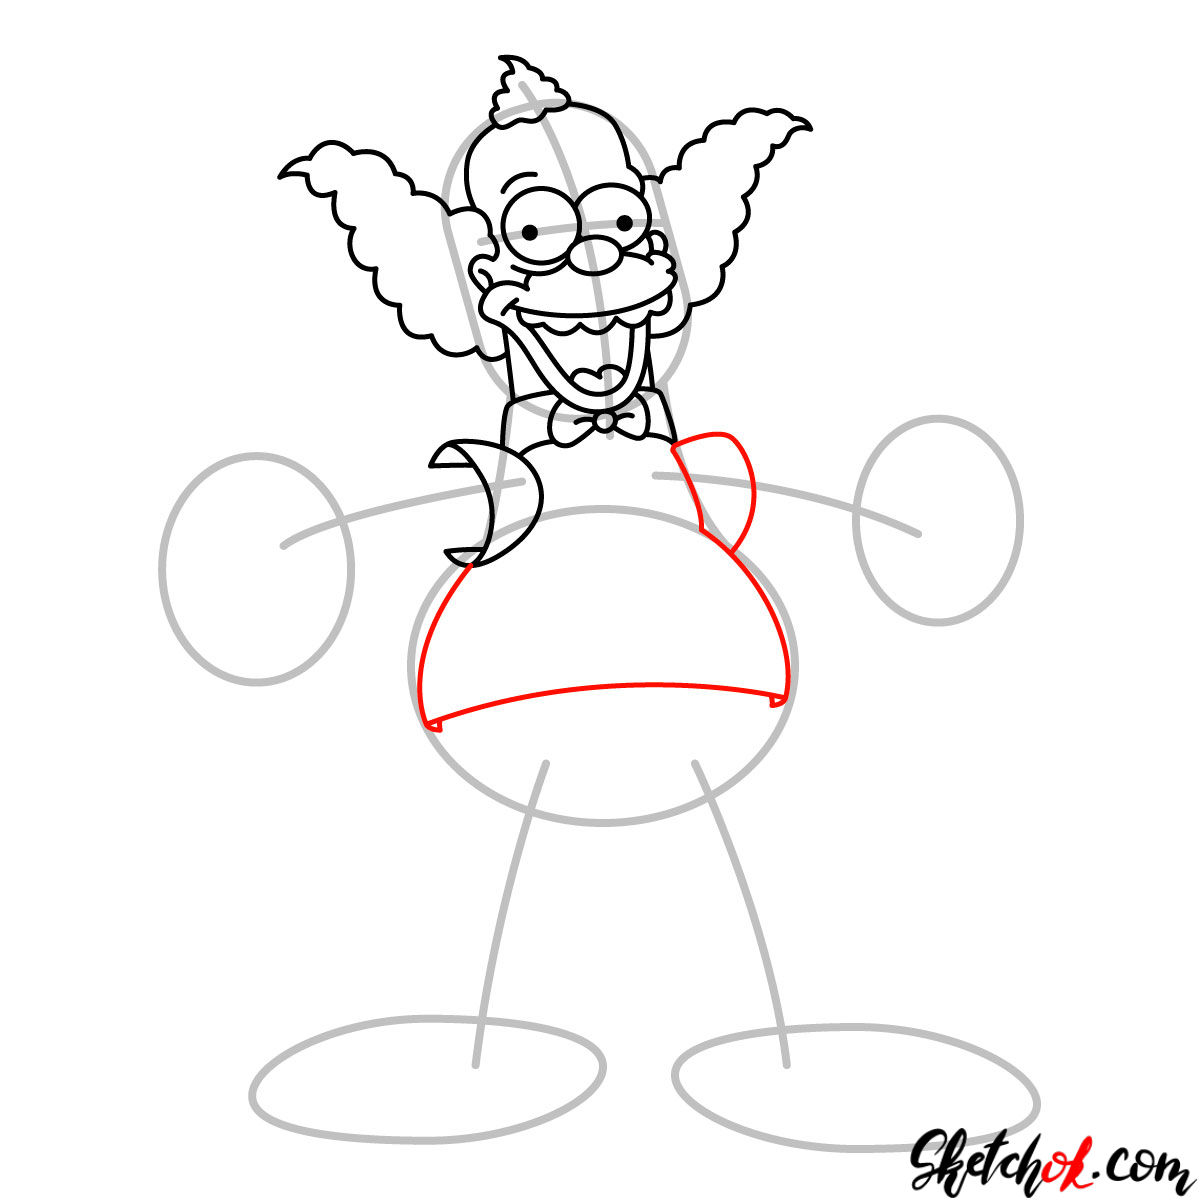 How to draw Krusty the Clown - step 07.